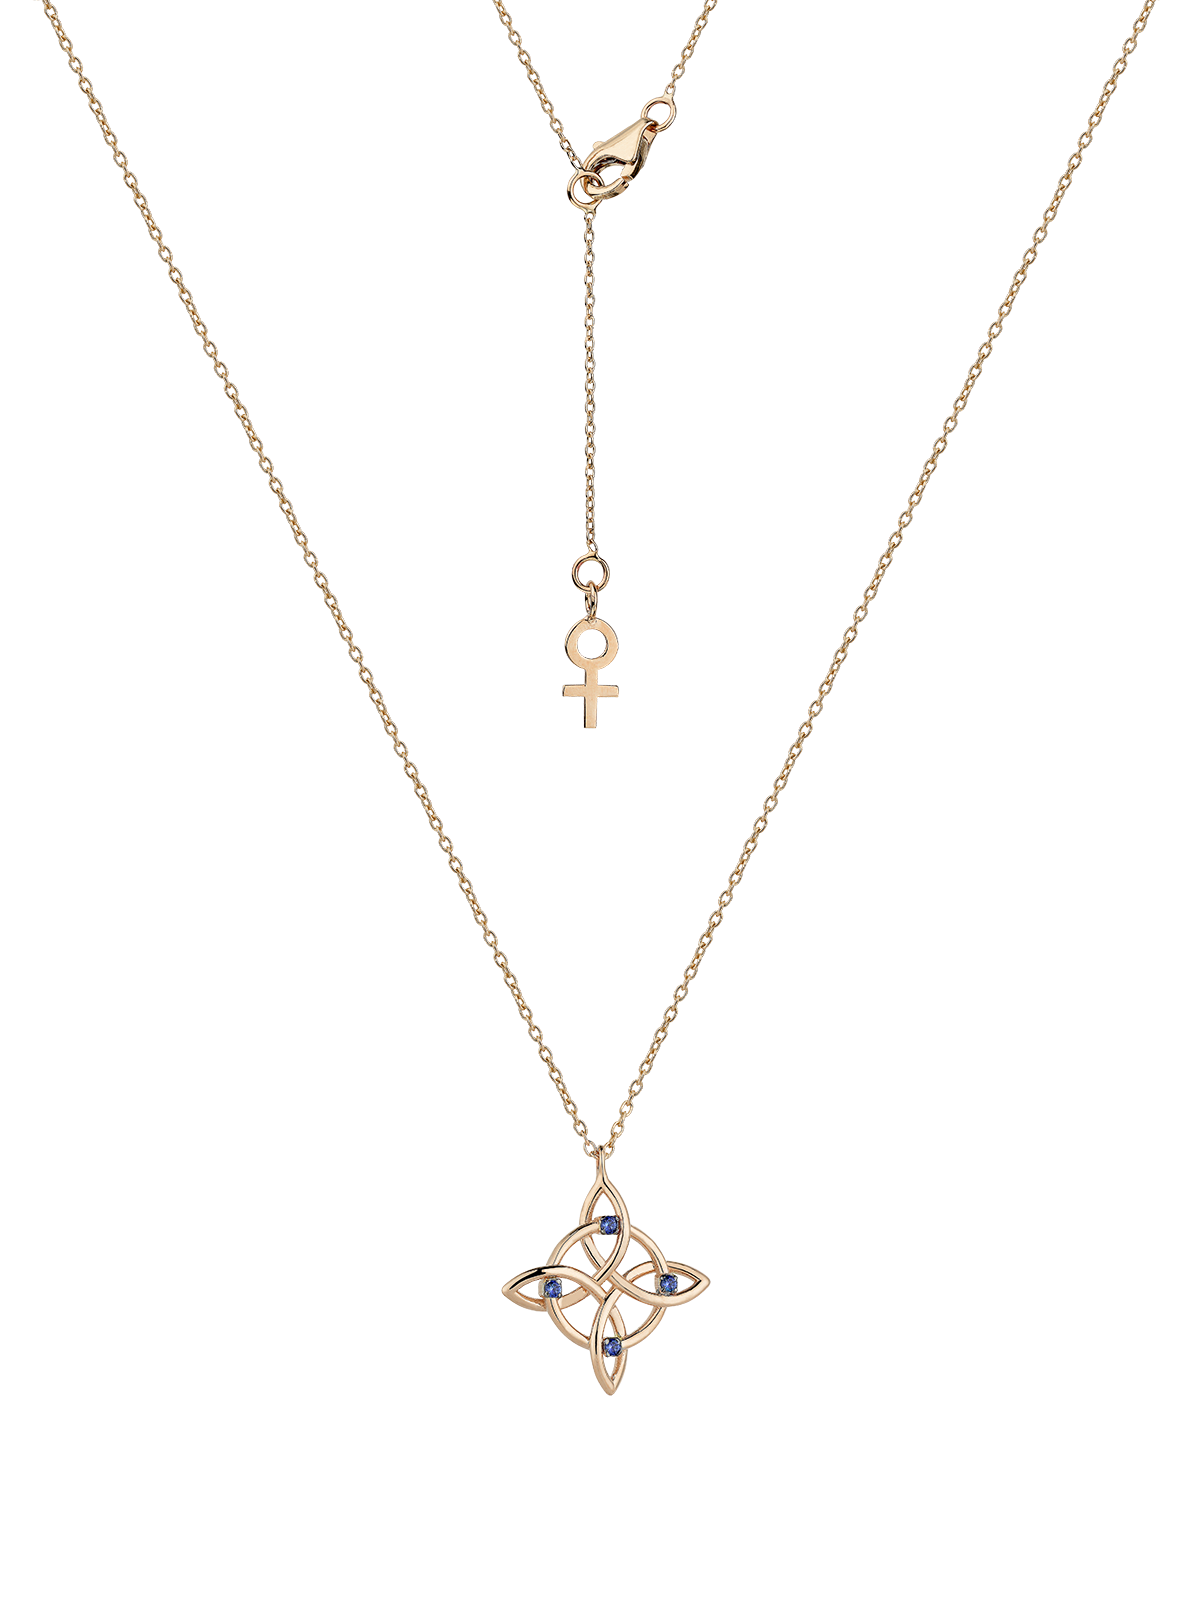 Pure Magic Knot Necklace in Rose Gold - Her Story Shop